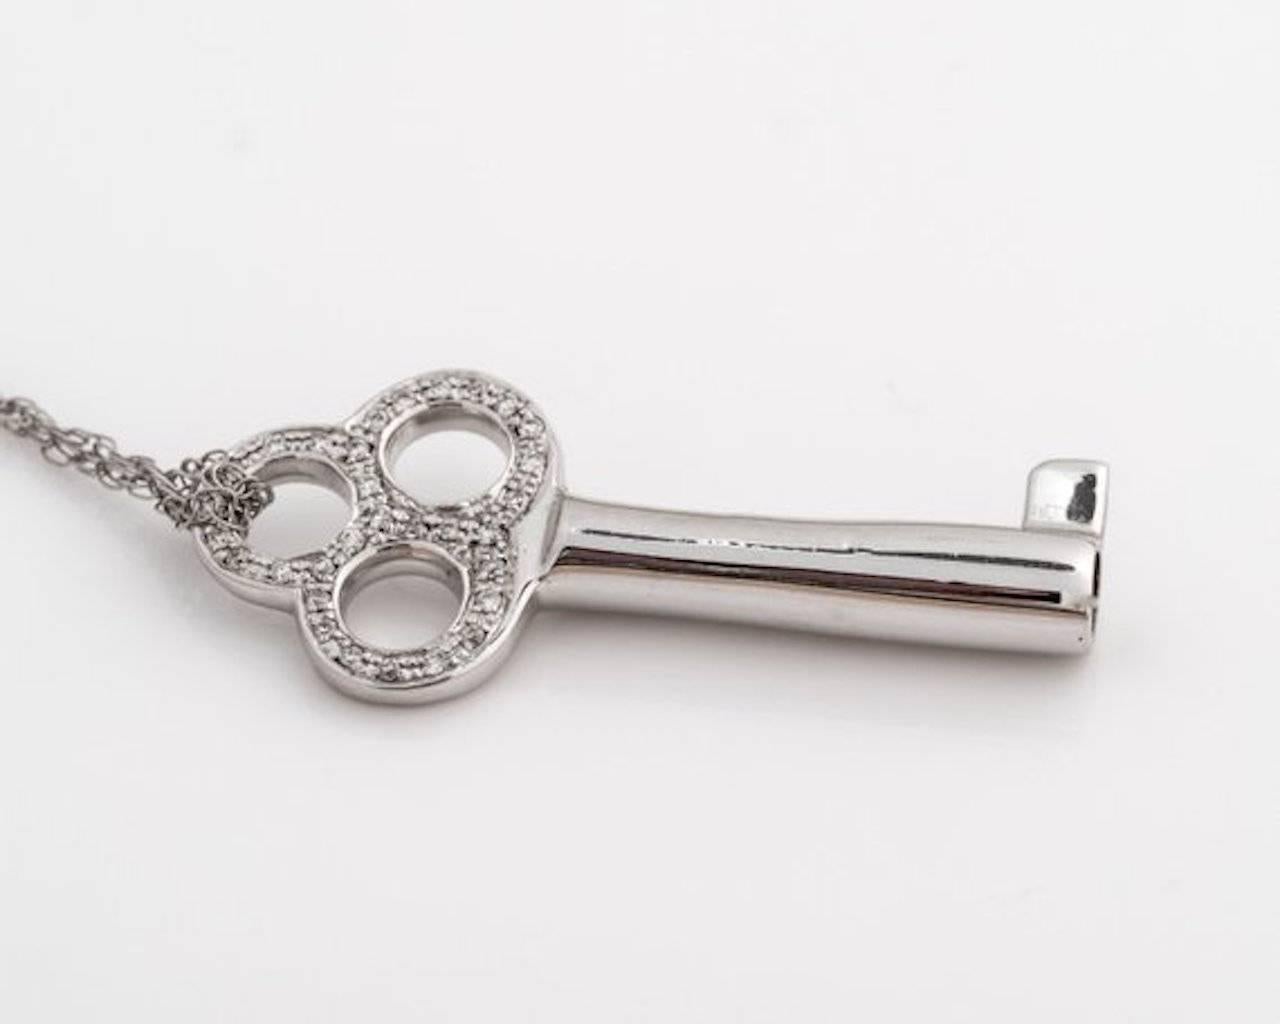 1980s Key Pendant - 14k White Gold, Diamonds

This skeleton key design pendant features open circles at the top with a hollow cylinder shaft. 
The open circles are encrusted with bezel set Diamonds.
This pendant is accompanied with the chain as seen